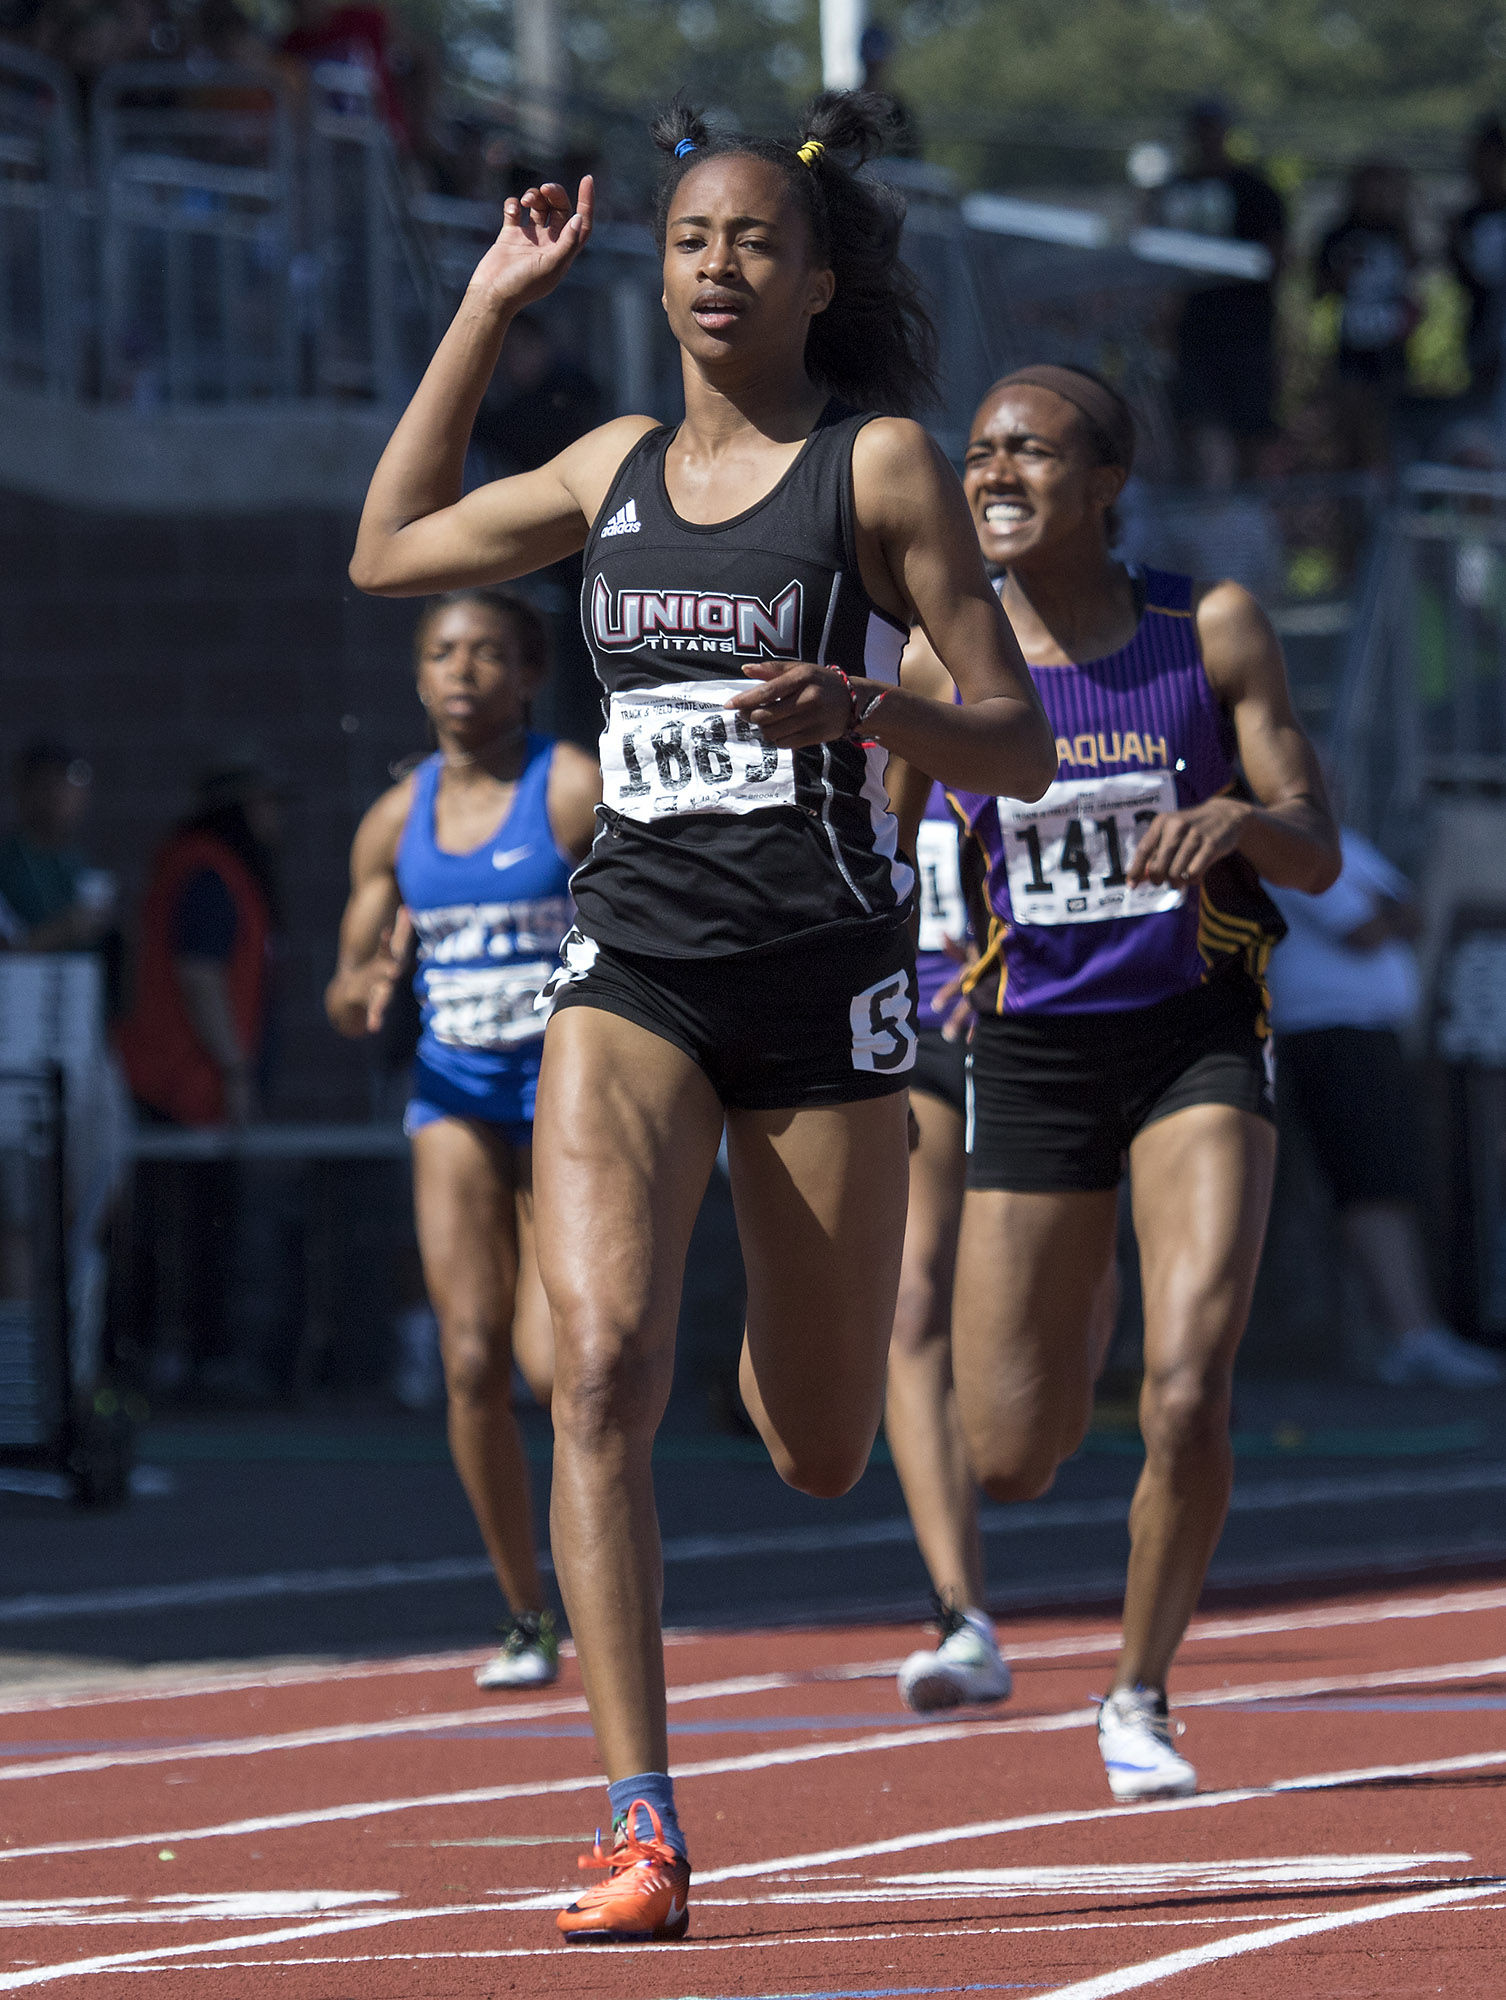 Union's Dai'lyn Merriweather reacts to crossing the finish line in 1st place in the 4A Girls 200 Meter Dash at the WA State Track and Field Meet Saturday, May 27, 2017, in Tacoma, Wash. Her sister, Jai'lyn finished 2nd.